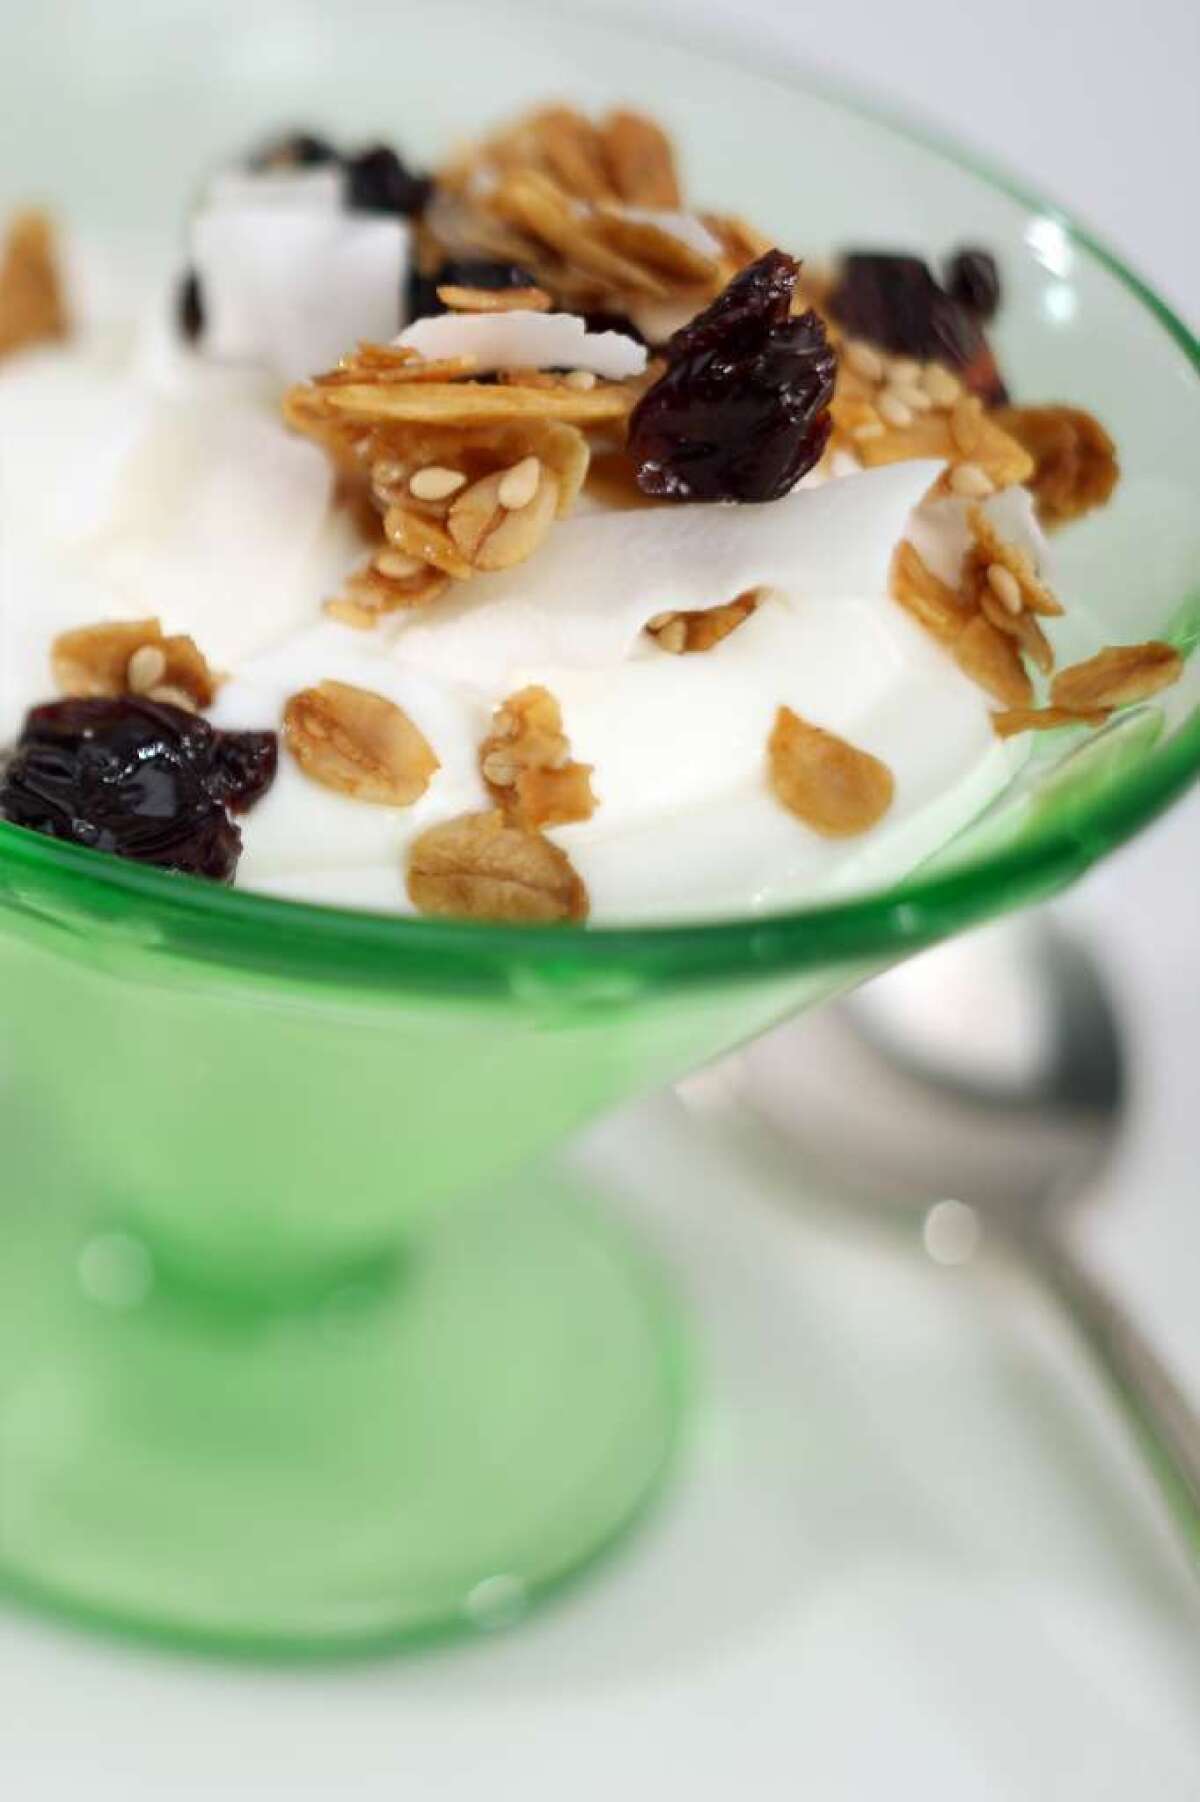 For a simple dessert or snack, top plain yogurt with granola.